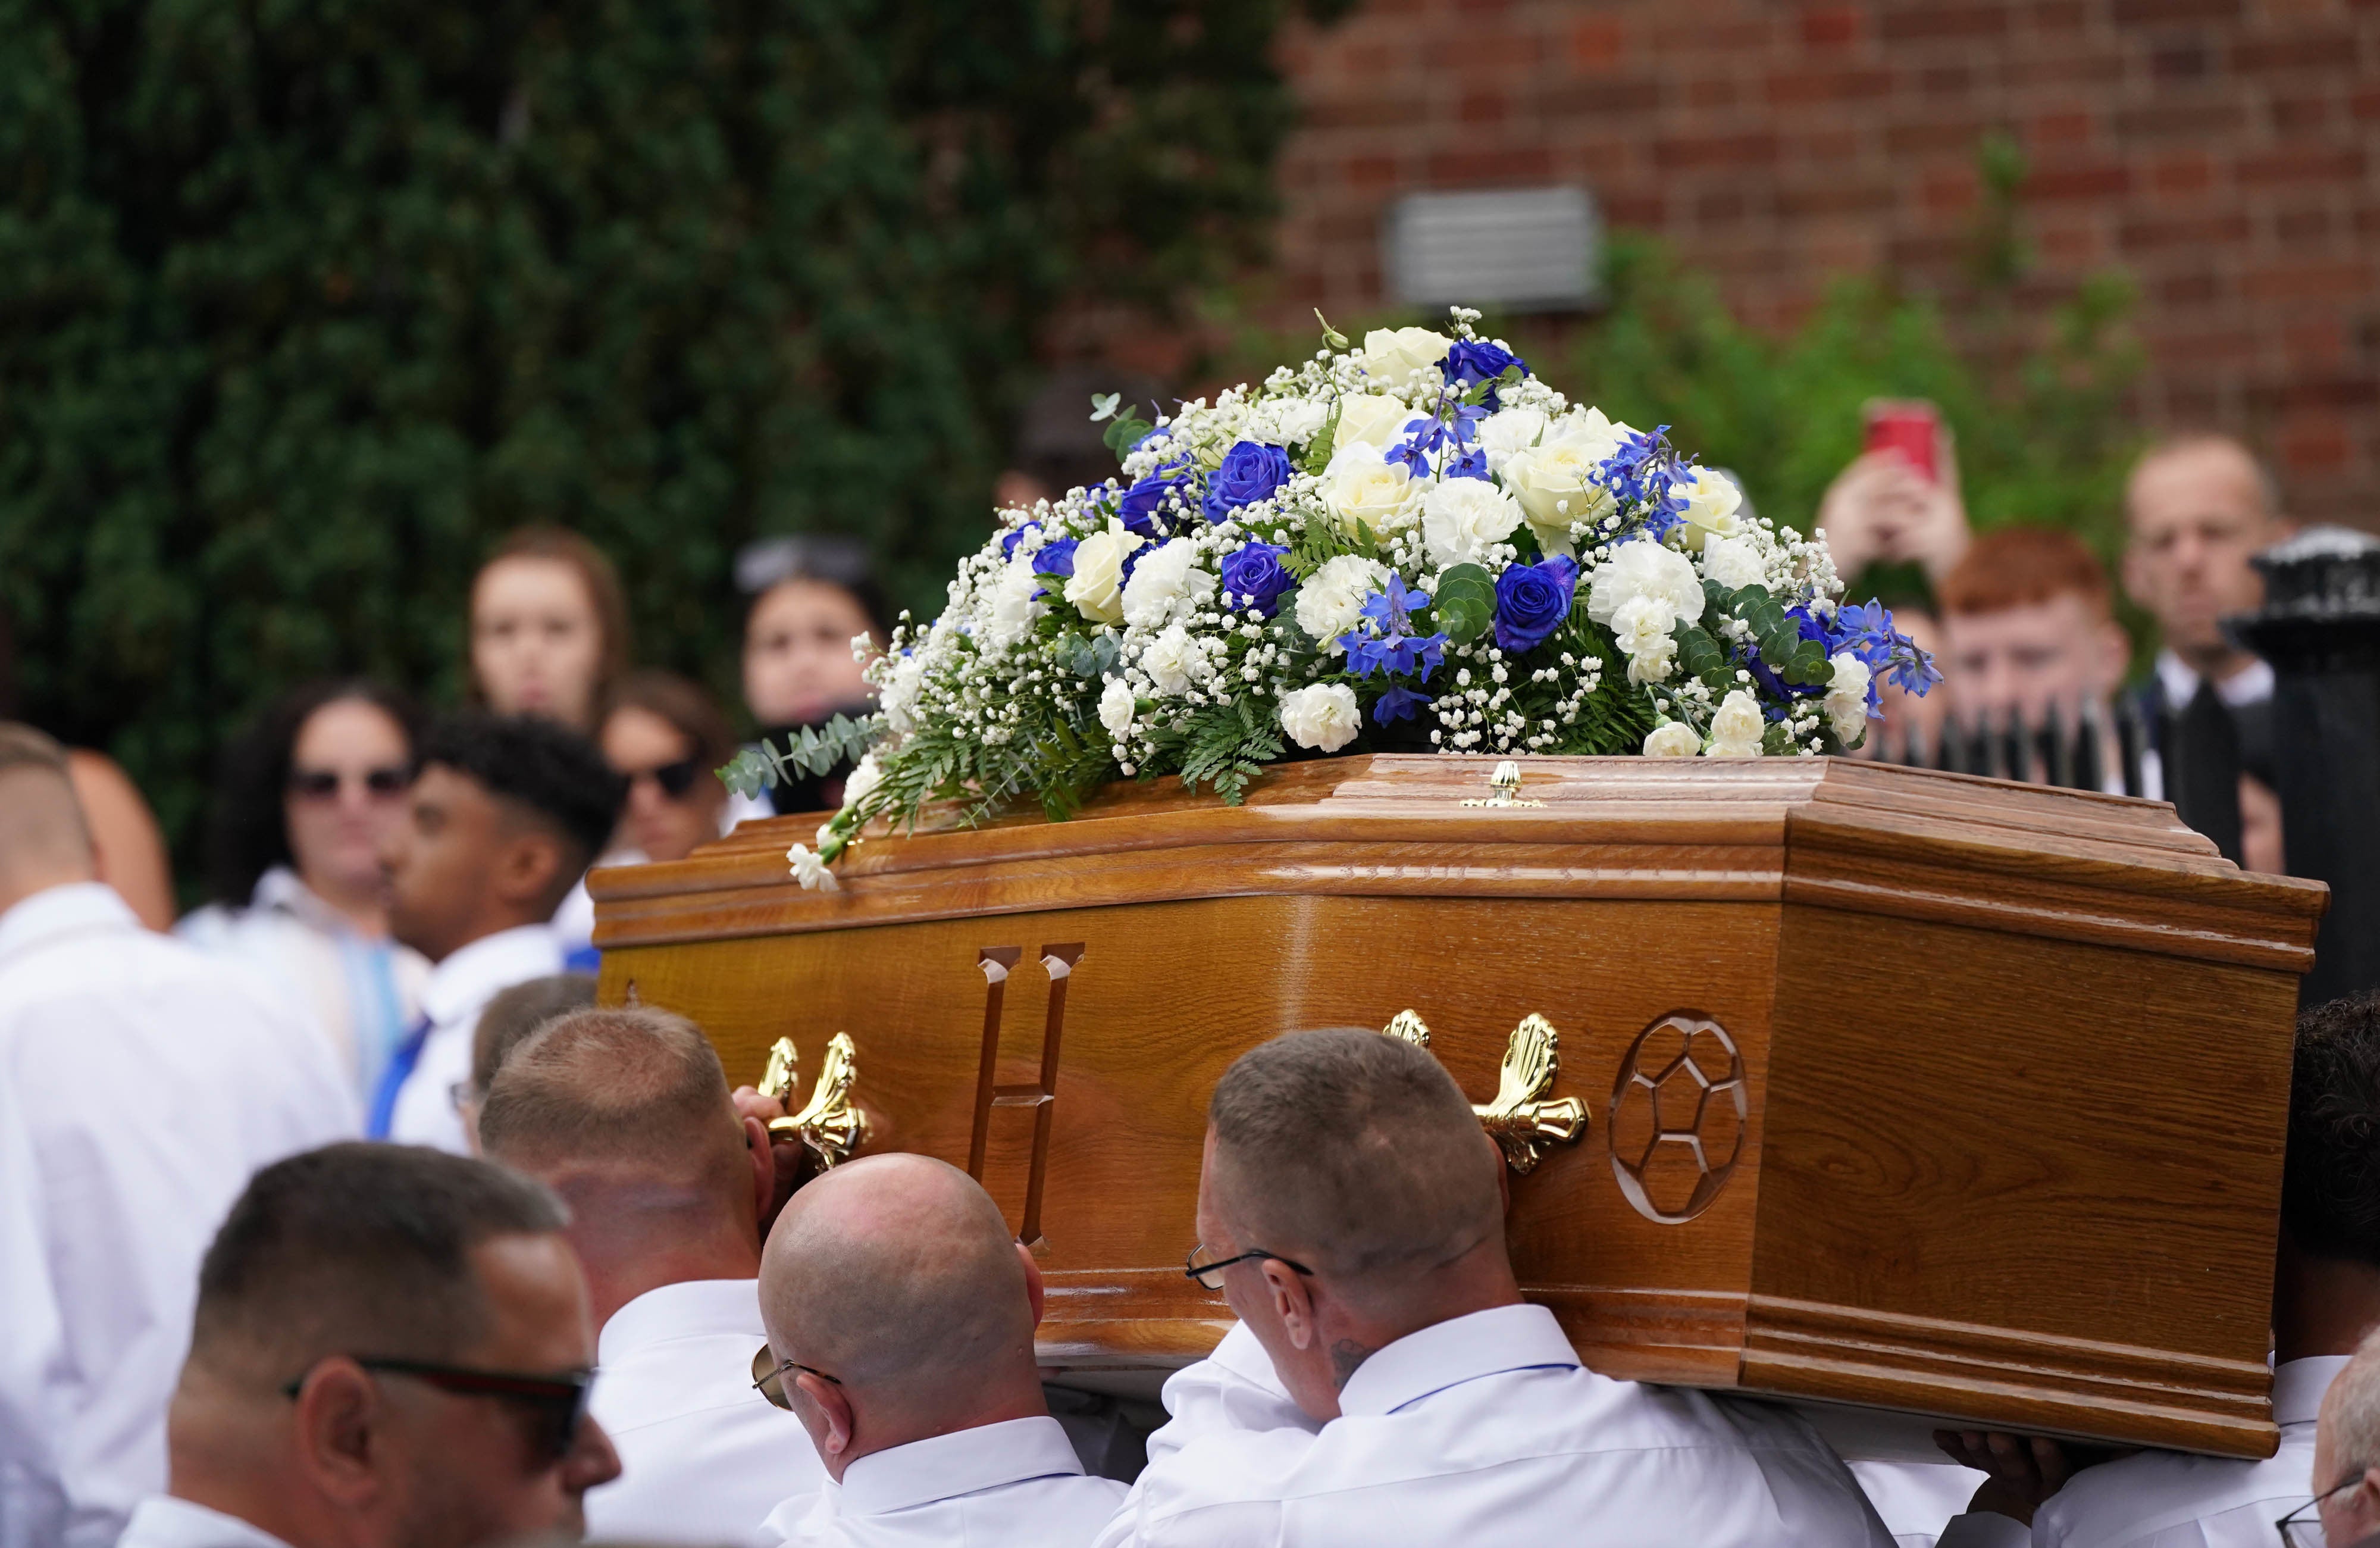 The coffin of Harvey is carried into the Church of the Resurrection in Ely, Cardiff